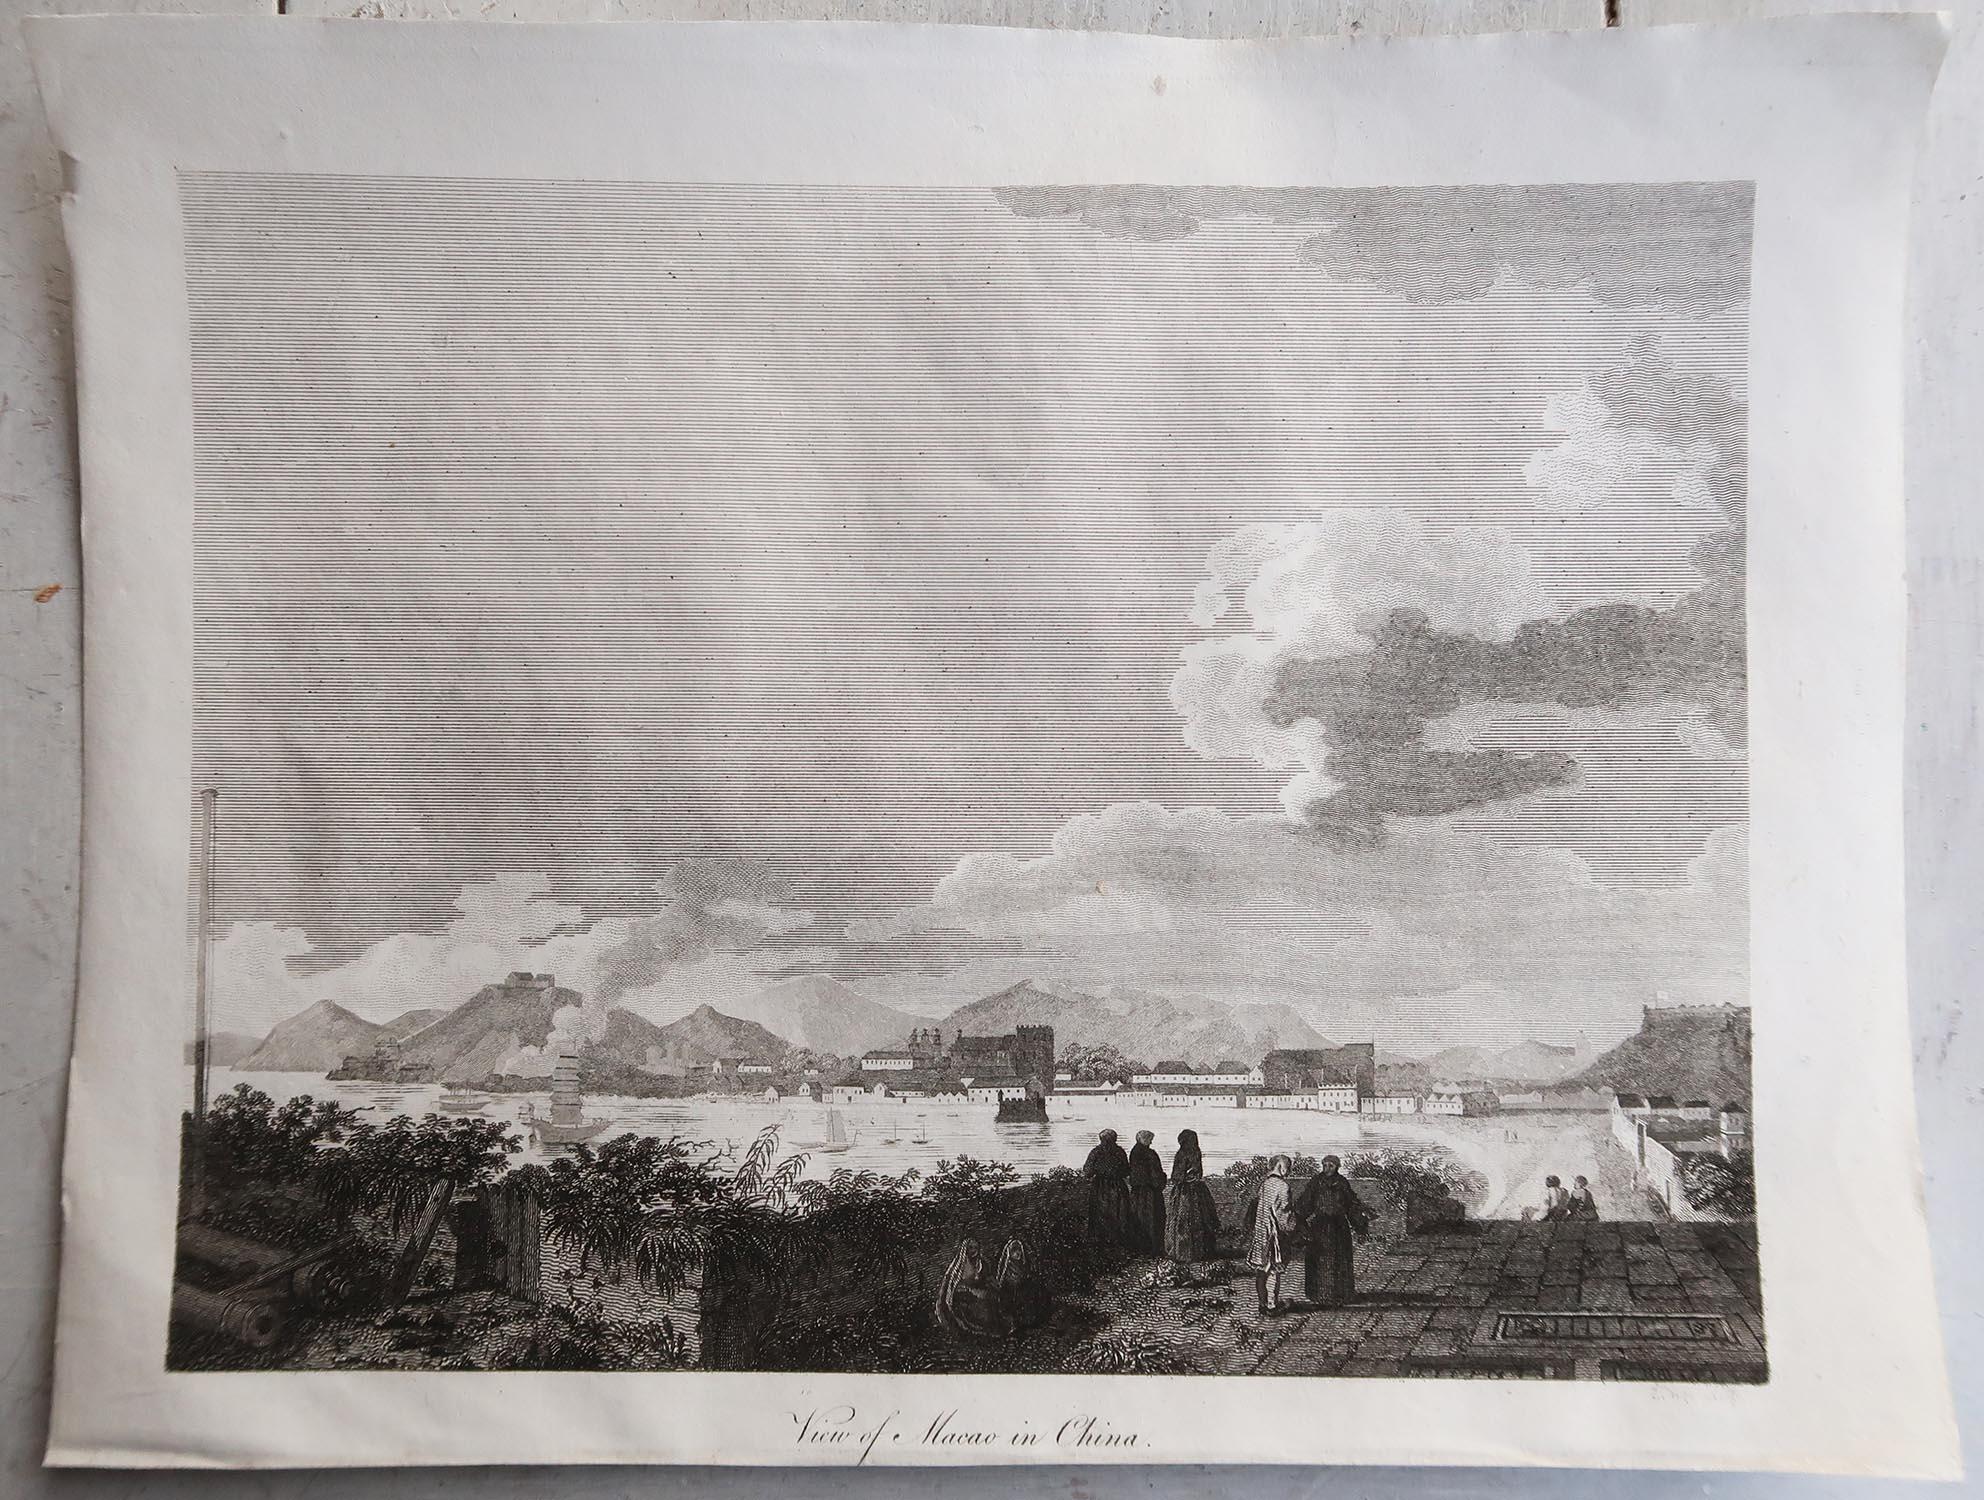 Other Original Antique Print of Macao, China. C.1810. For Sale